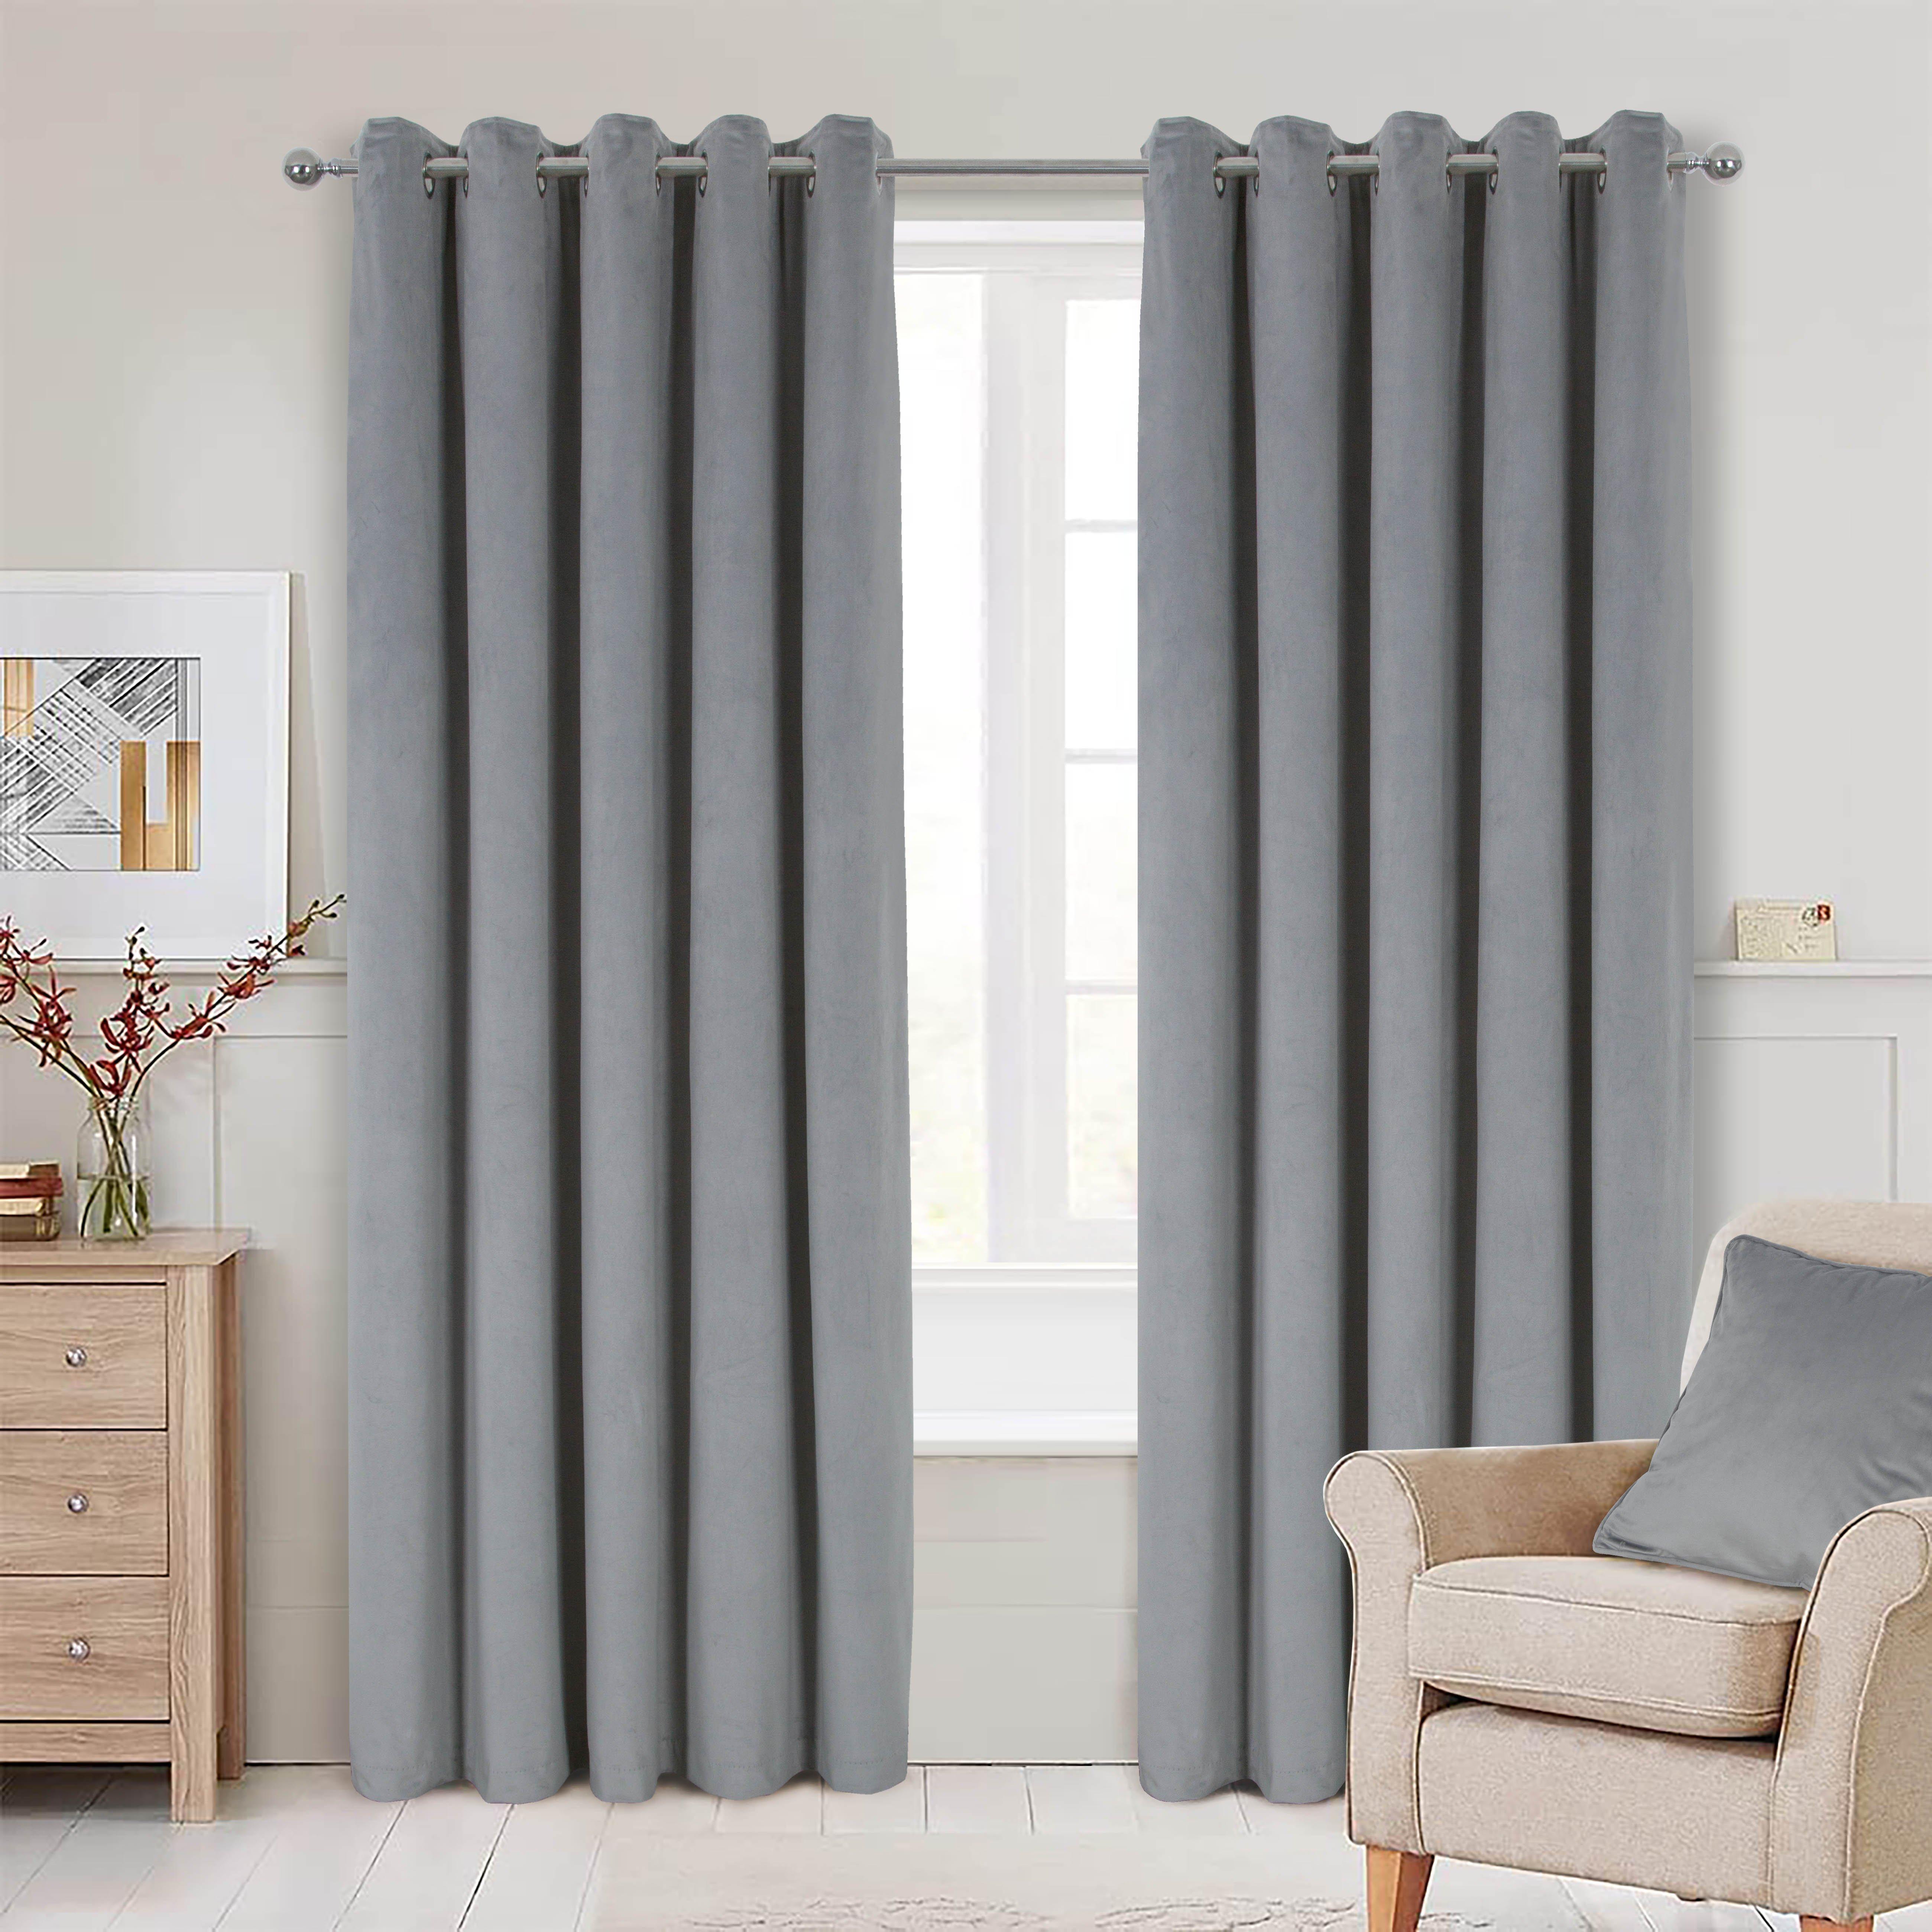 Thermal Interlined Velour Eyelet Curtains Pair